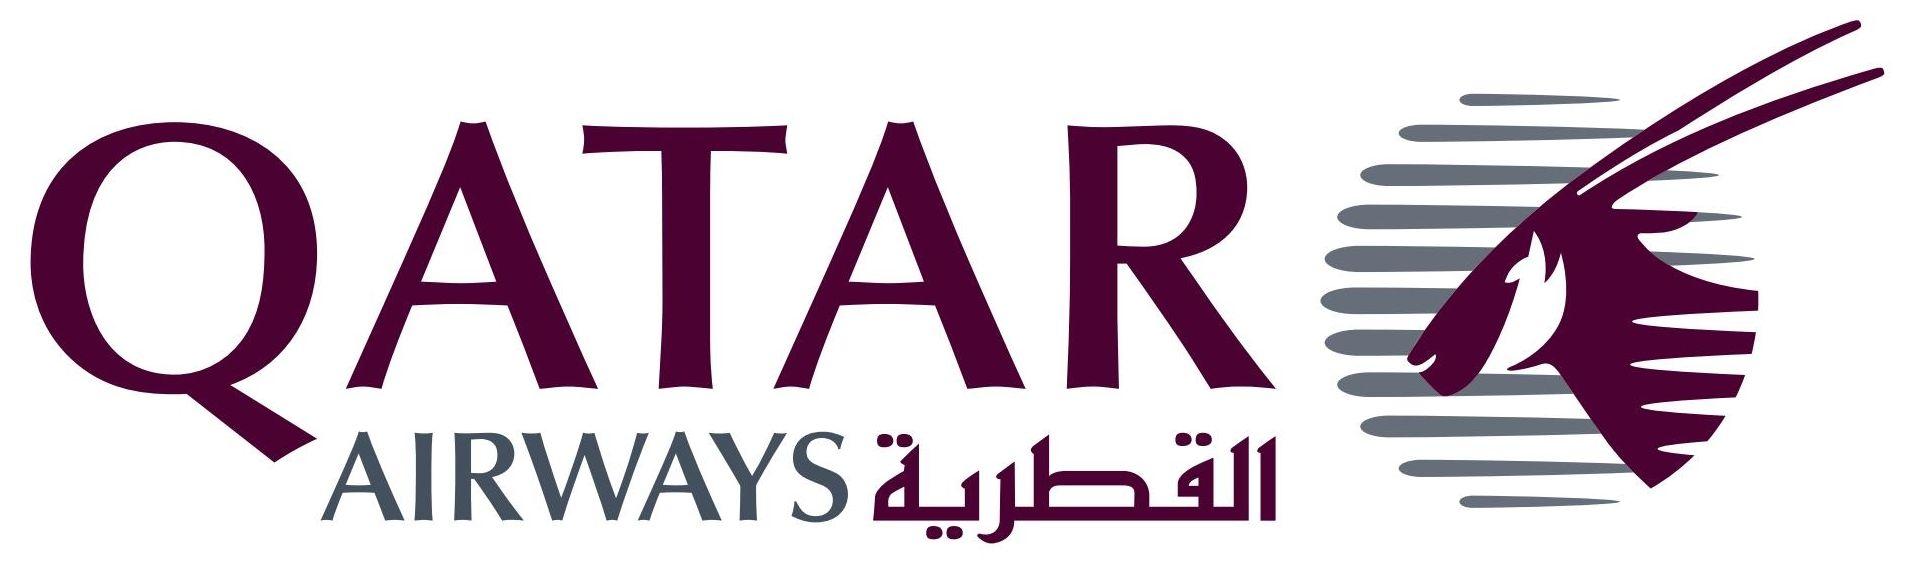 Emirates Airlines Logo - qatar airways logo Along with Etihad and Emirates this airline based ...